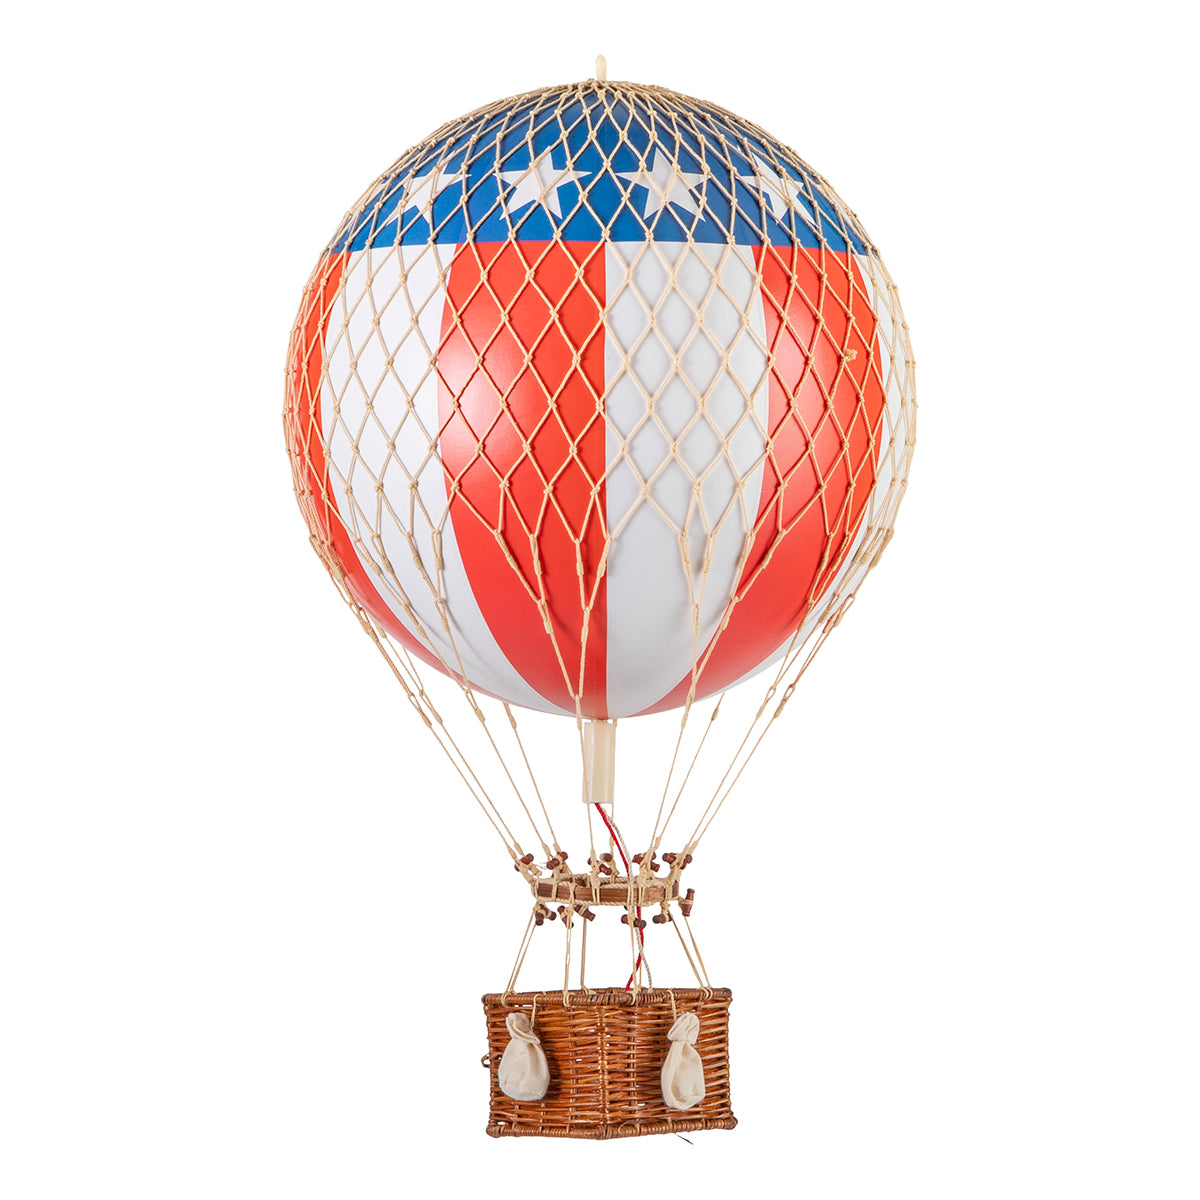 A unique perspective on a Wonderen Medium Hot Air Balloon adorned with stars and stripes, soaring to new heights.